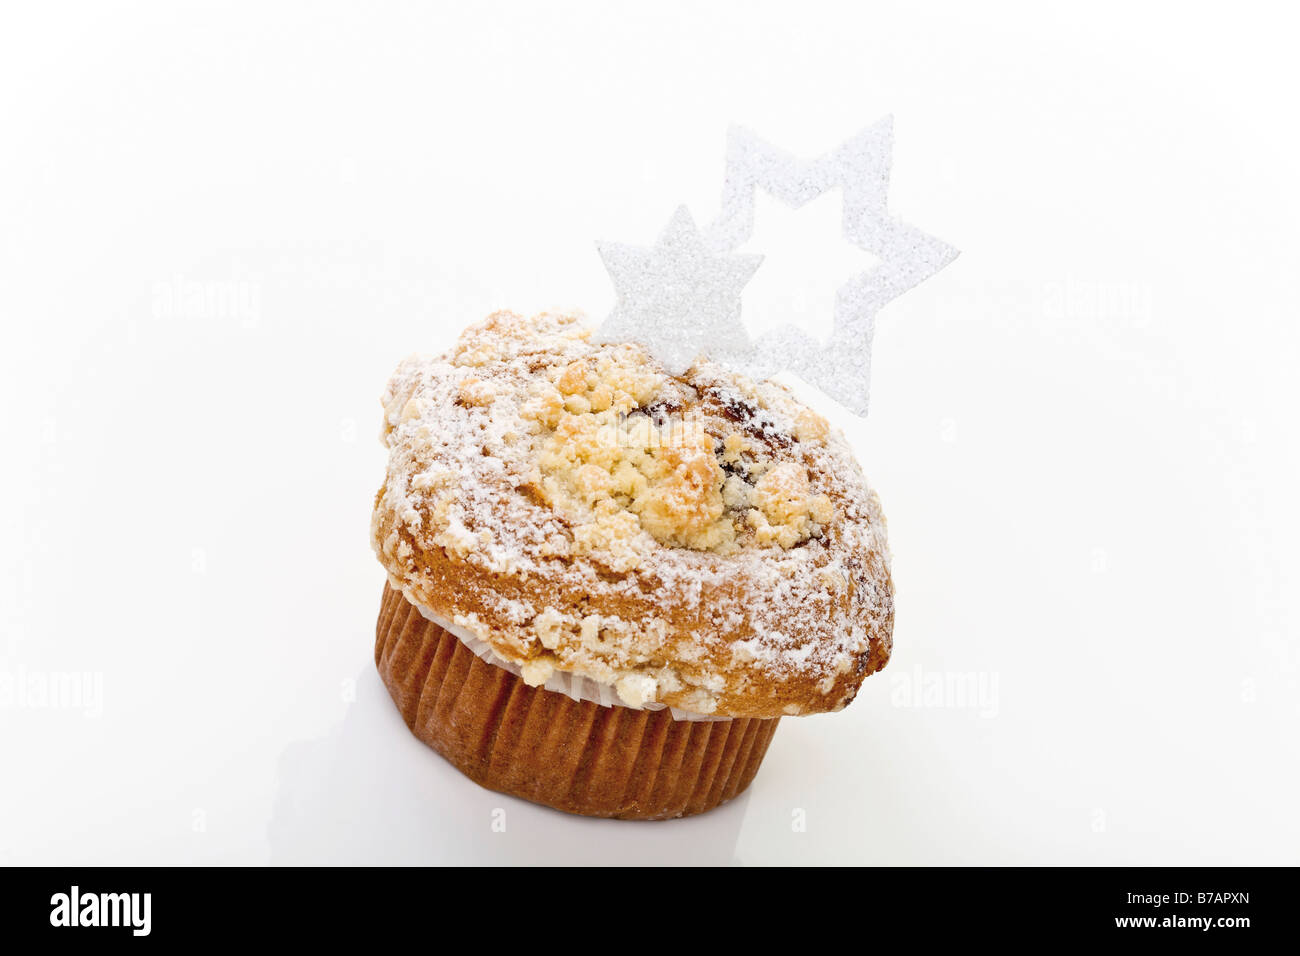 Christmas muffin with decorative stars Stock Photo